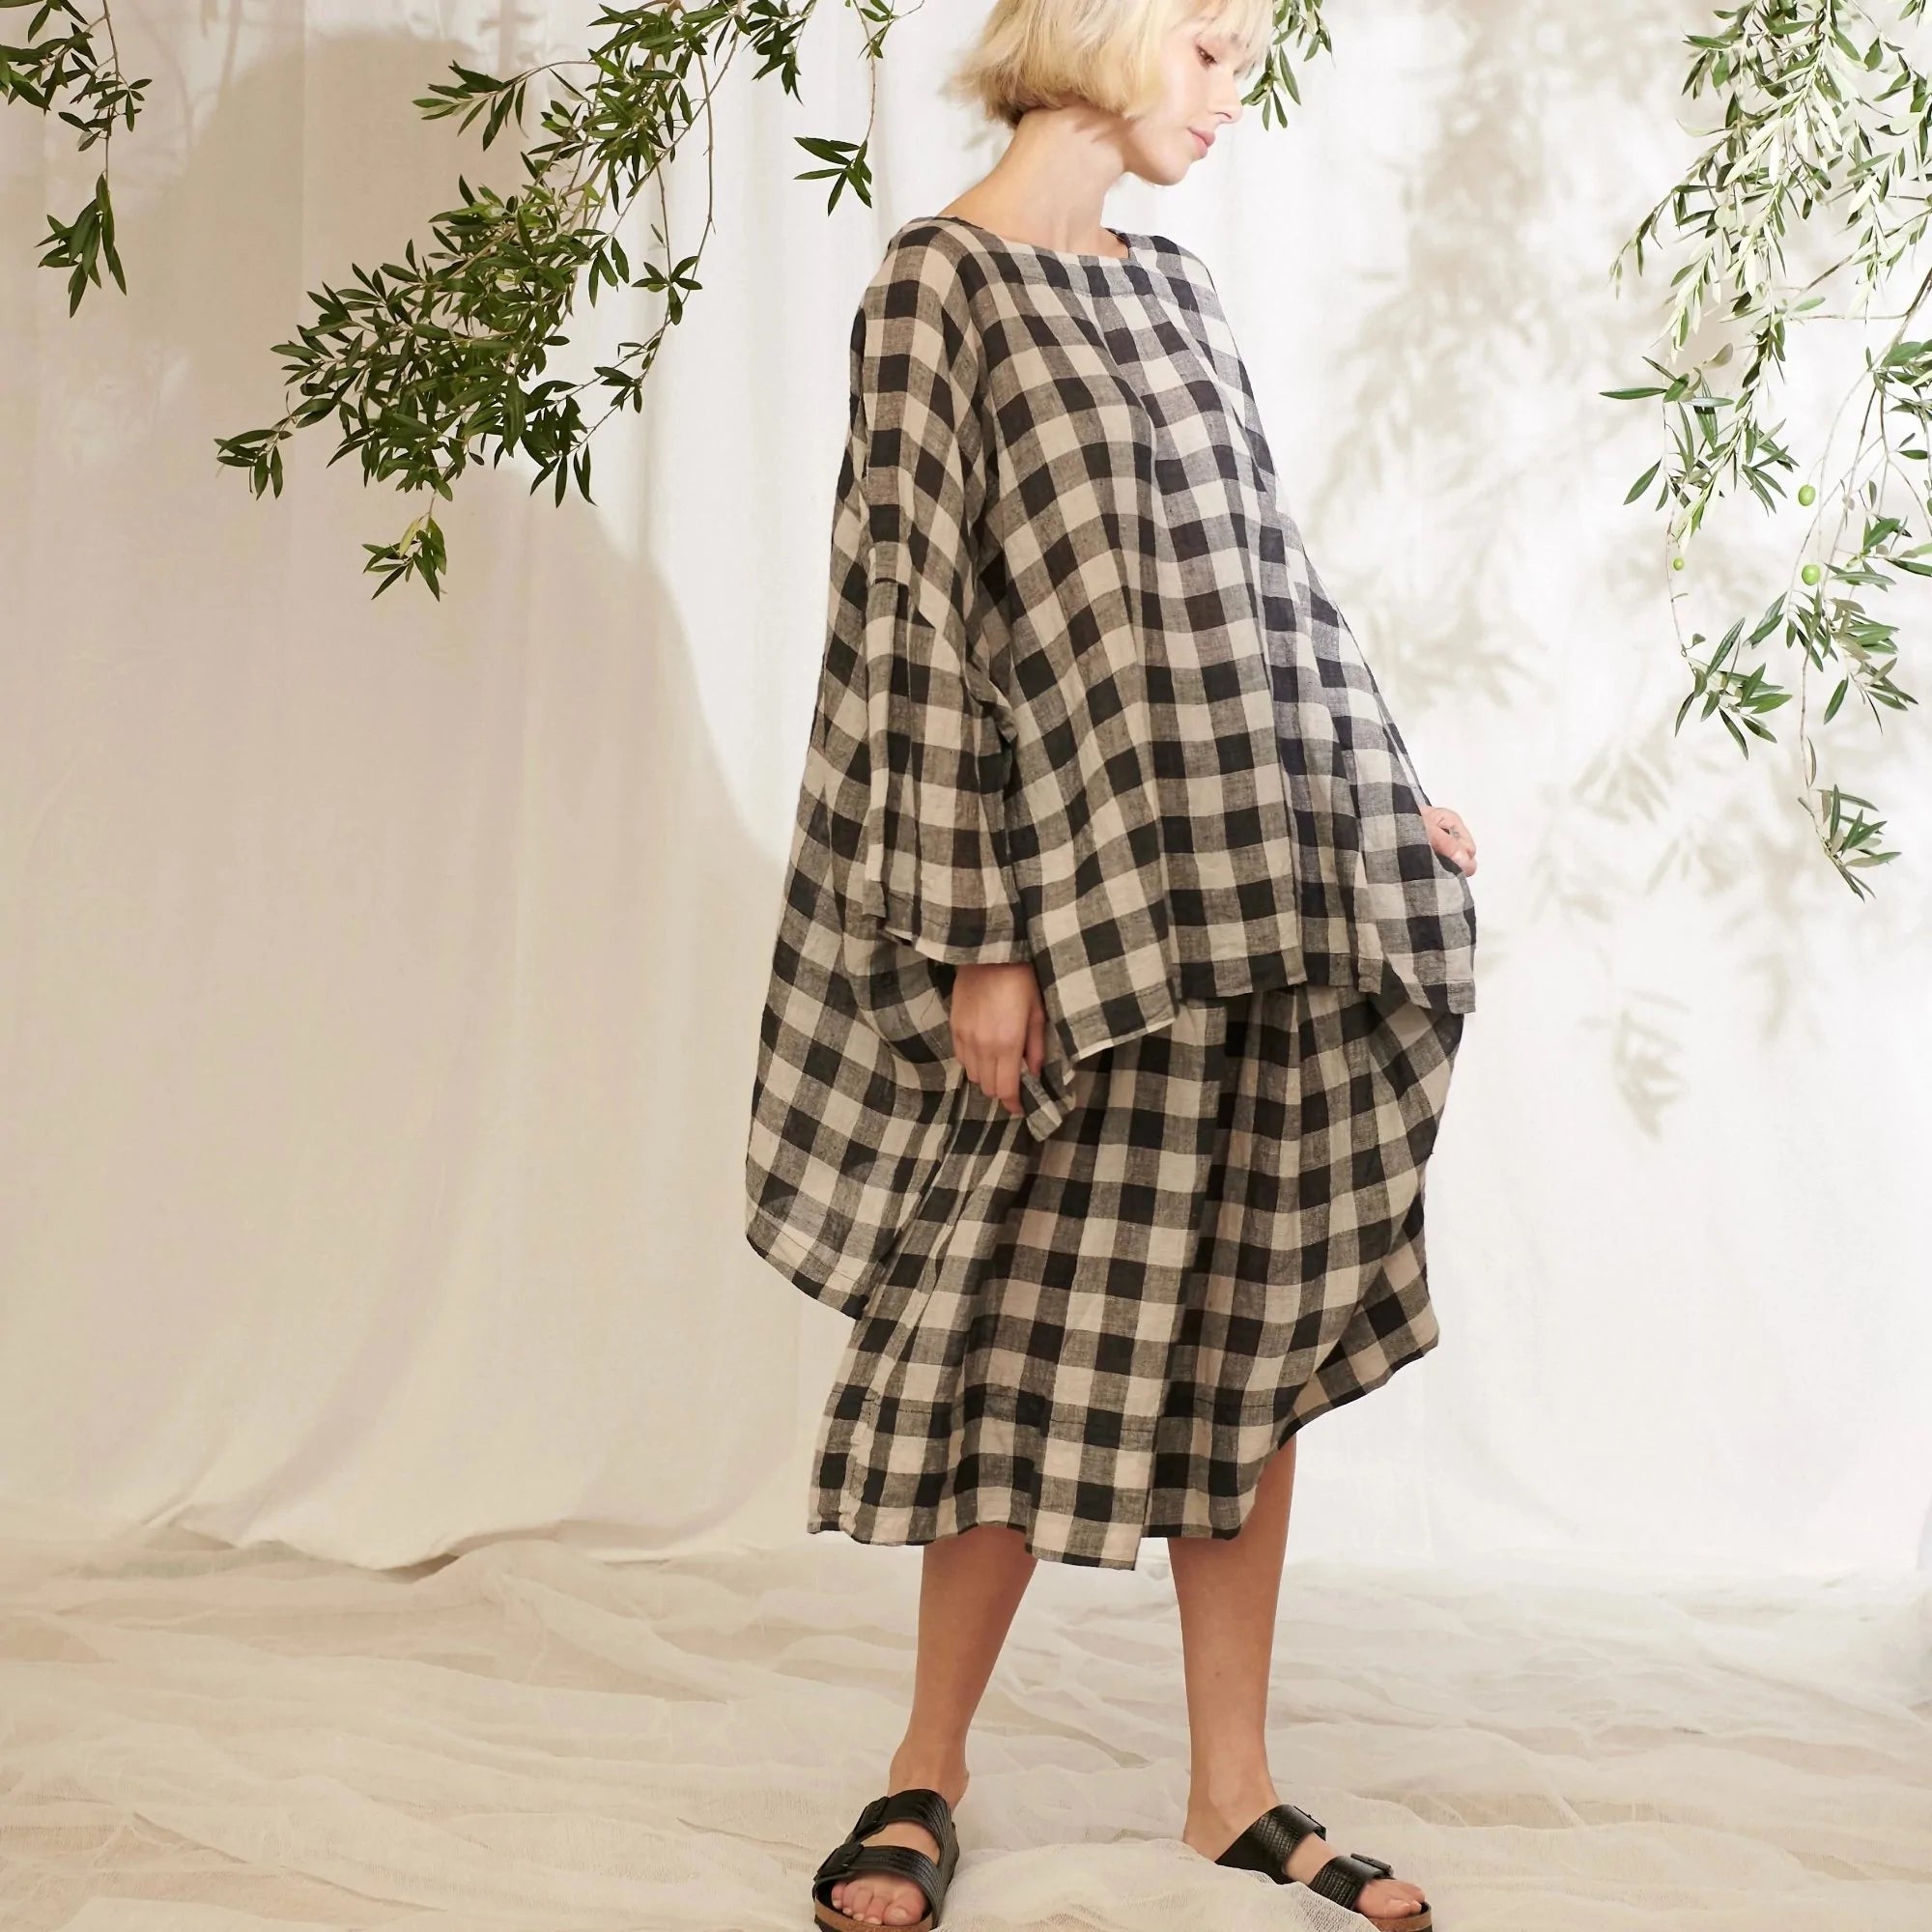 Isabelle Linen Gauze Check Top - Soot/Natural